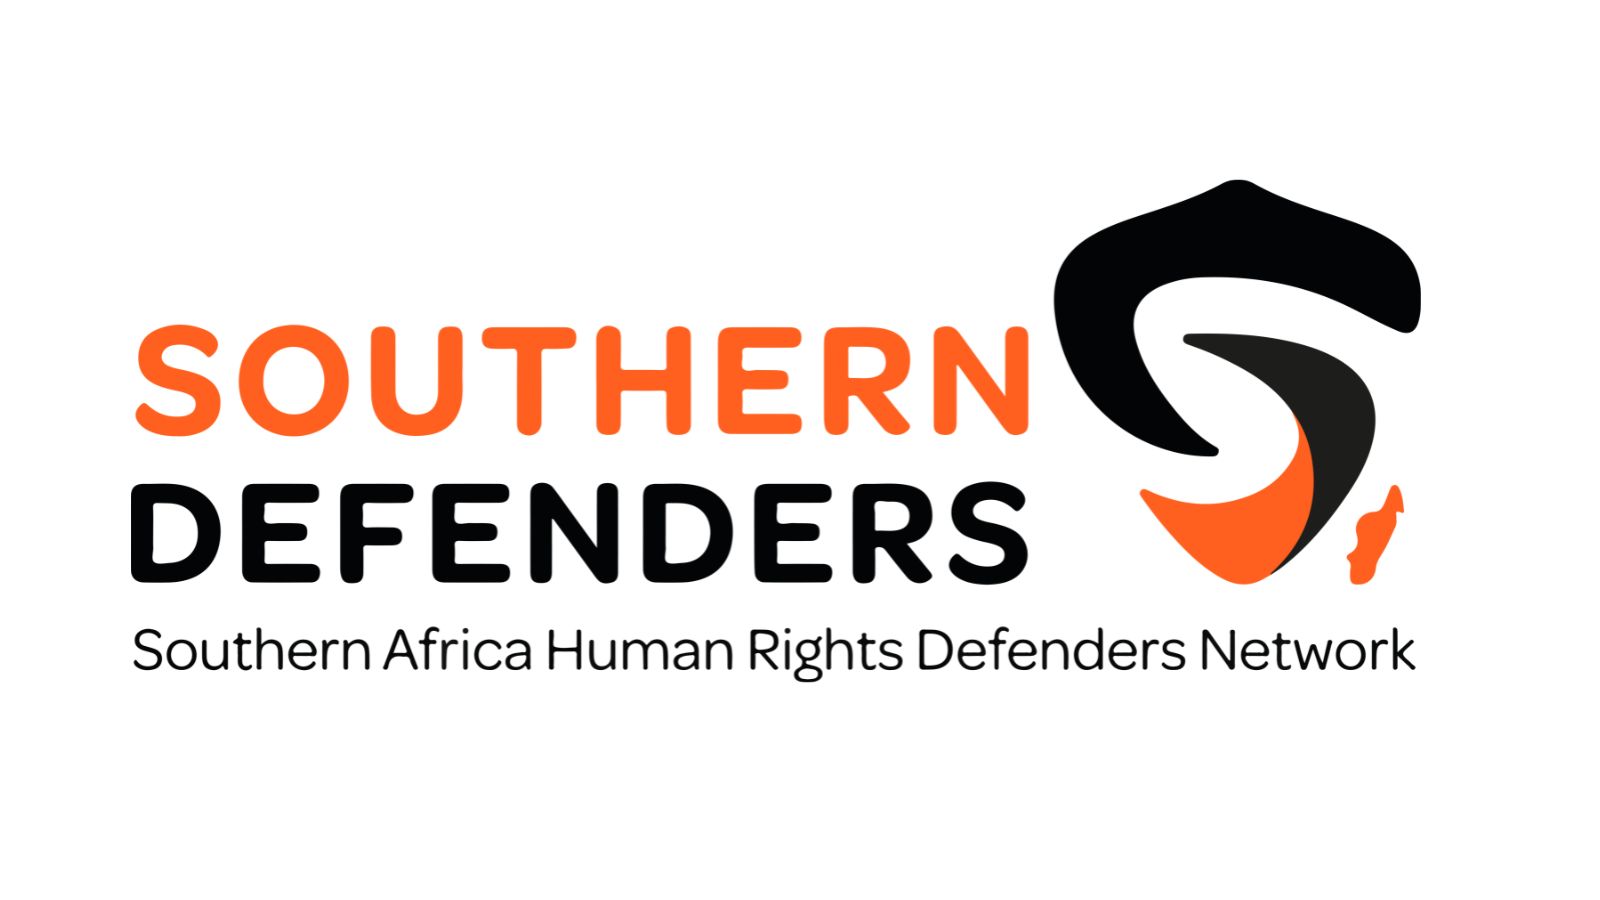 Southern Africa Human Rights Defenders Network (SouthernDefenders)